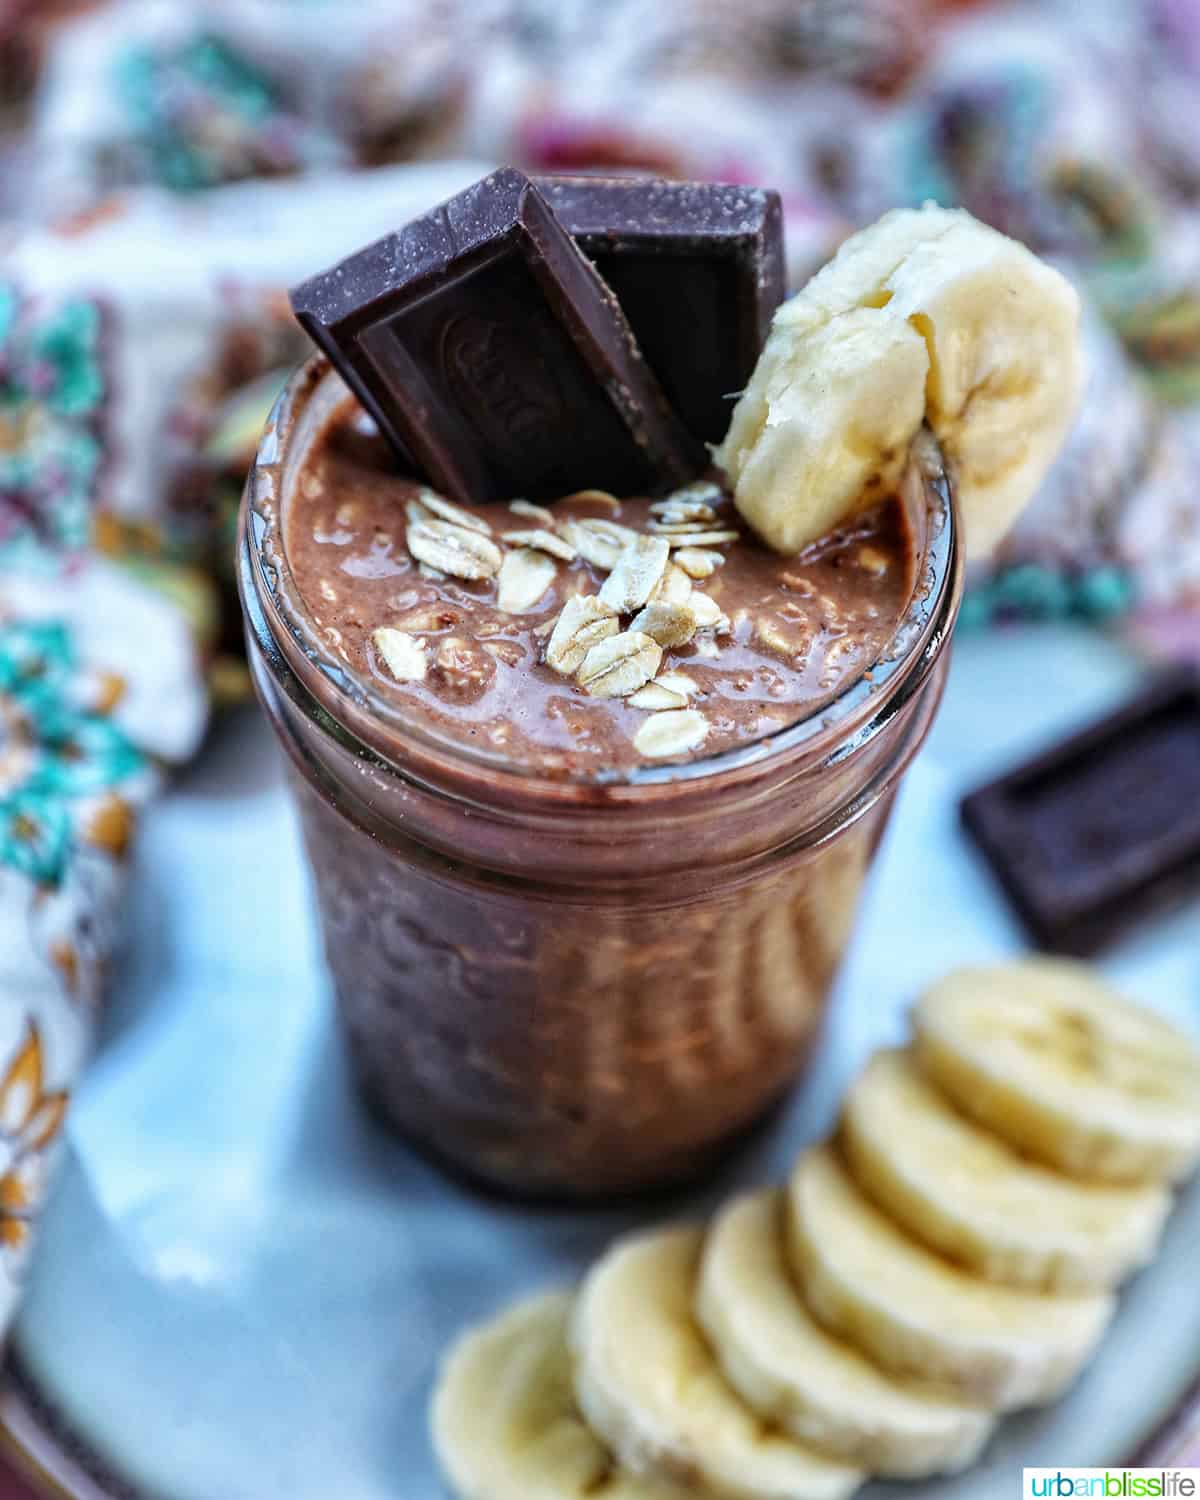 chocolate protein overnight oats topped with banana slices and chocolate pieces.